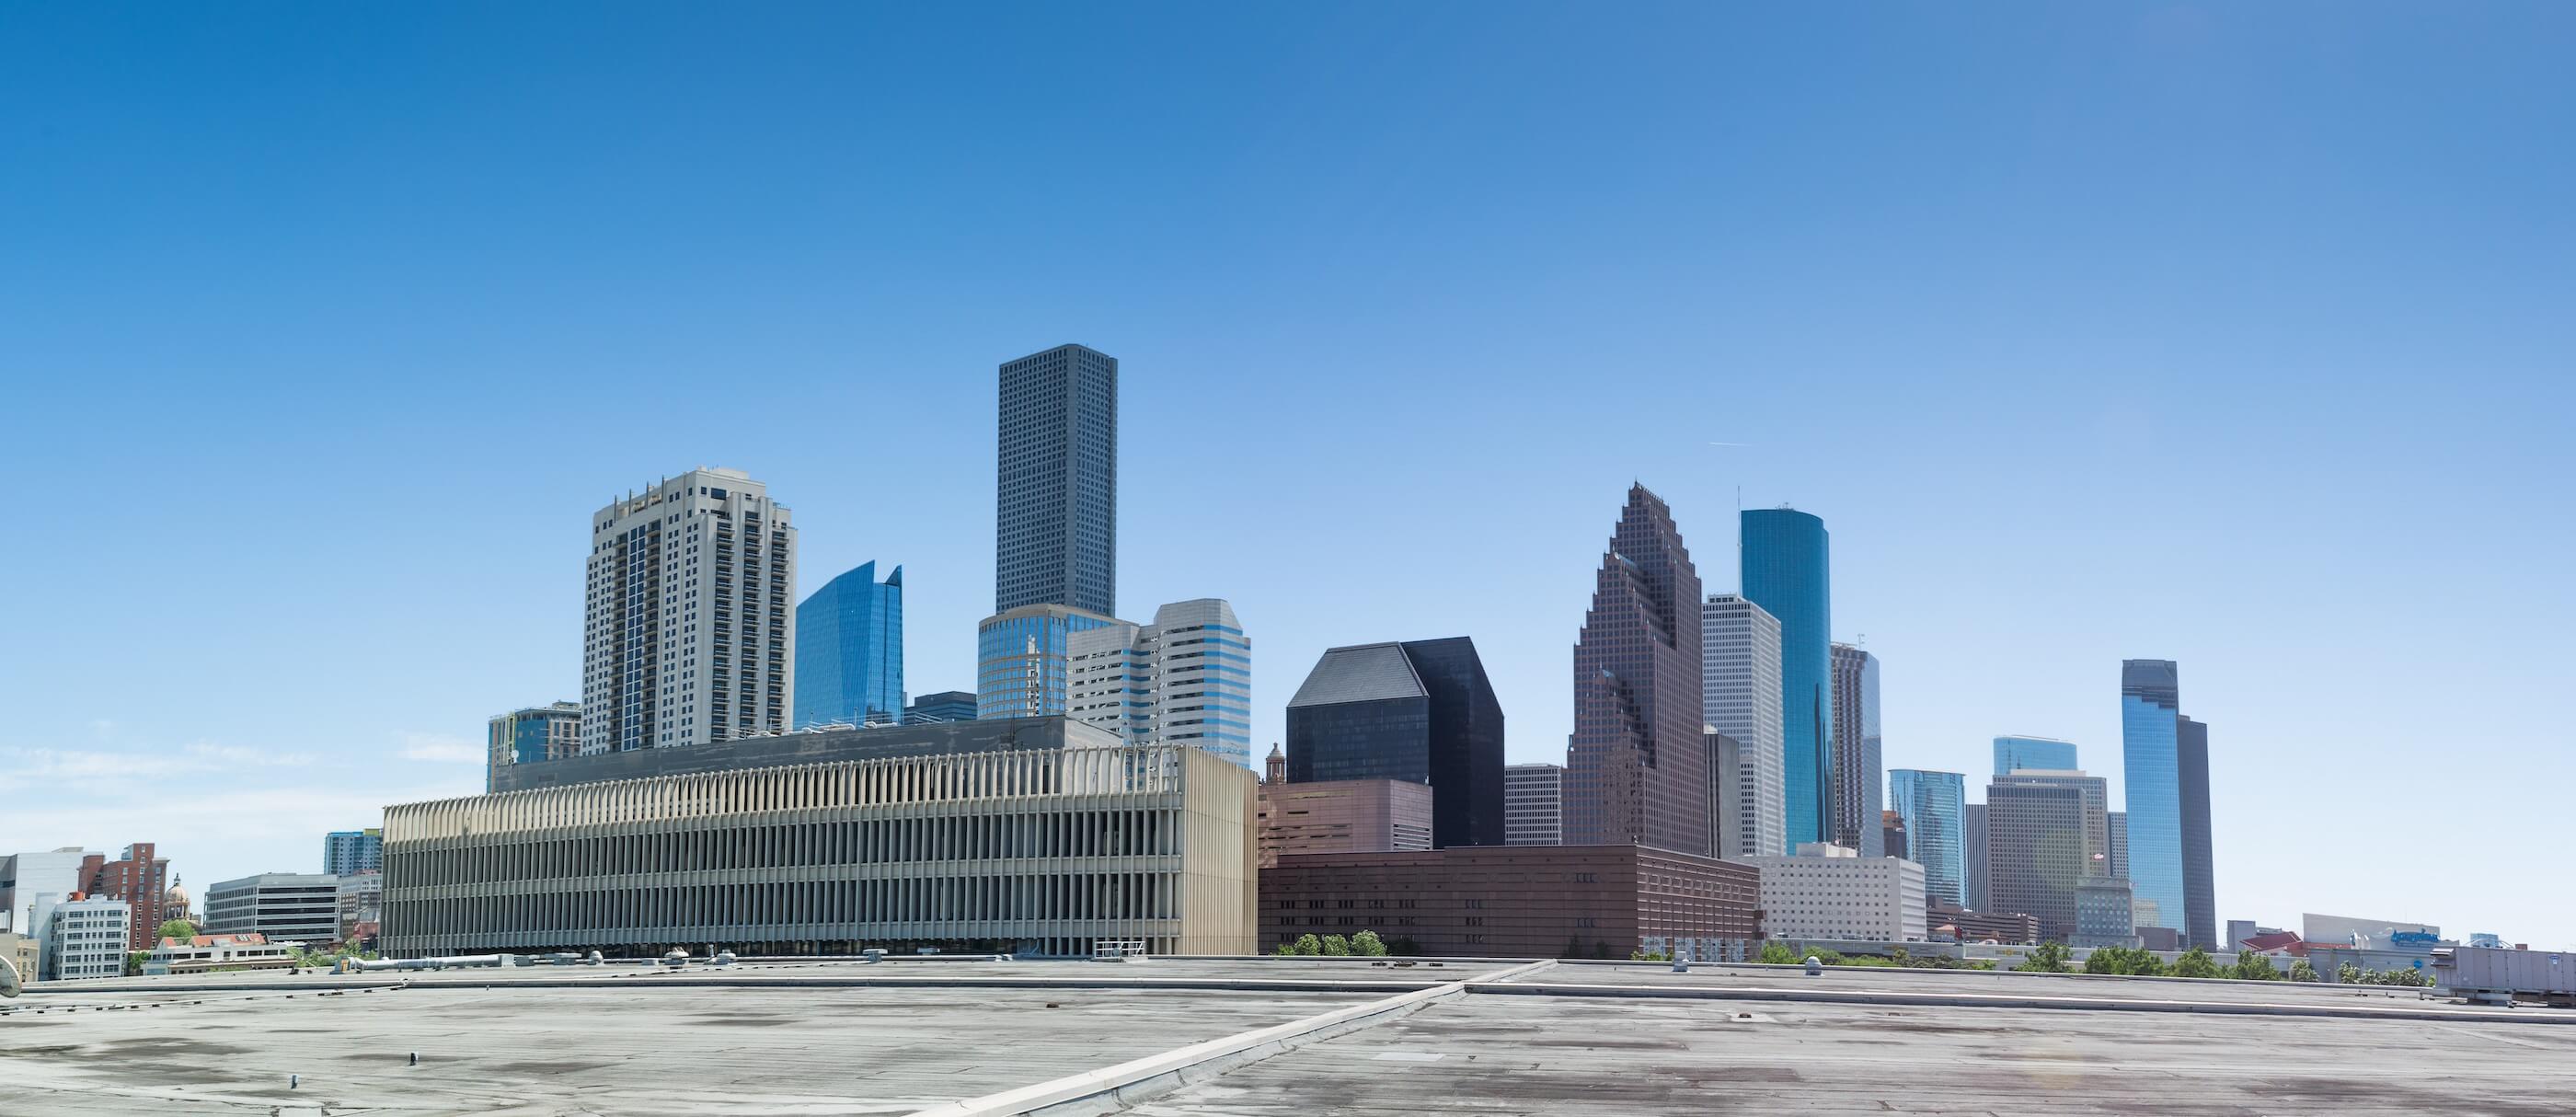 view of a modernist building surrounded by parking lots with the downtown houston skyline in the background